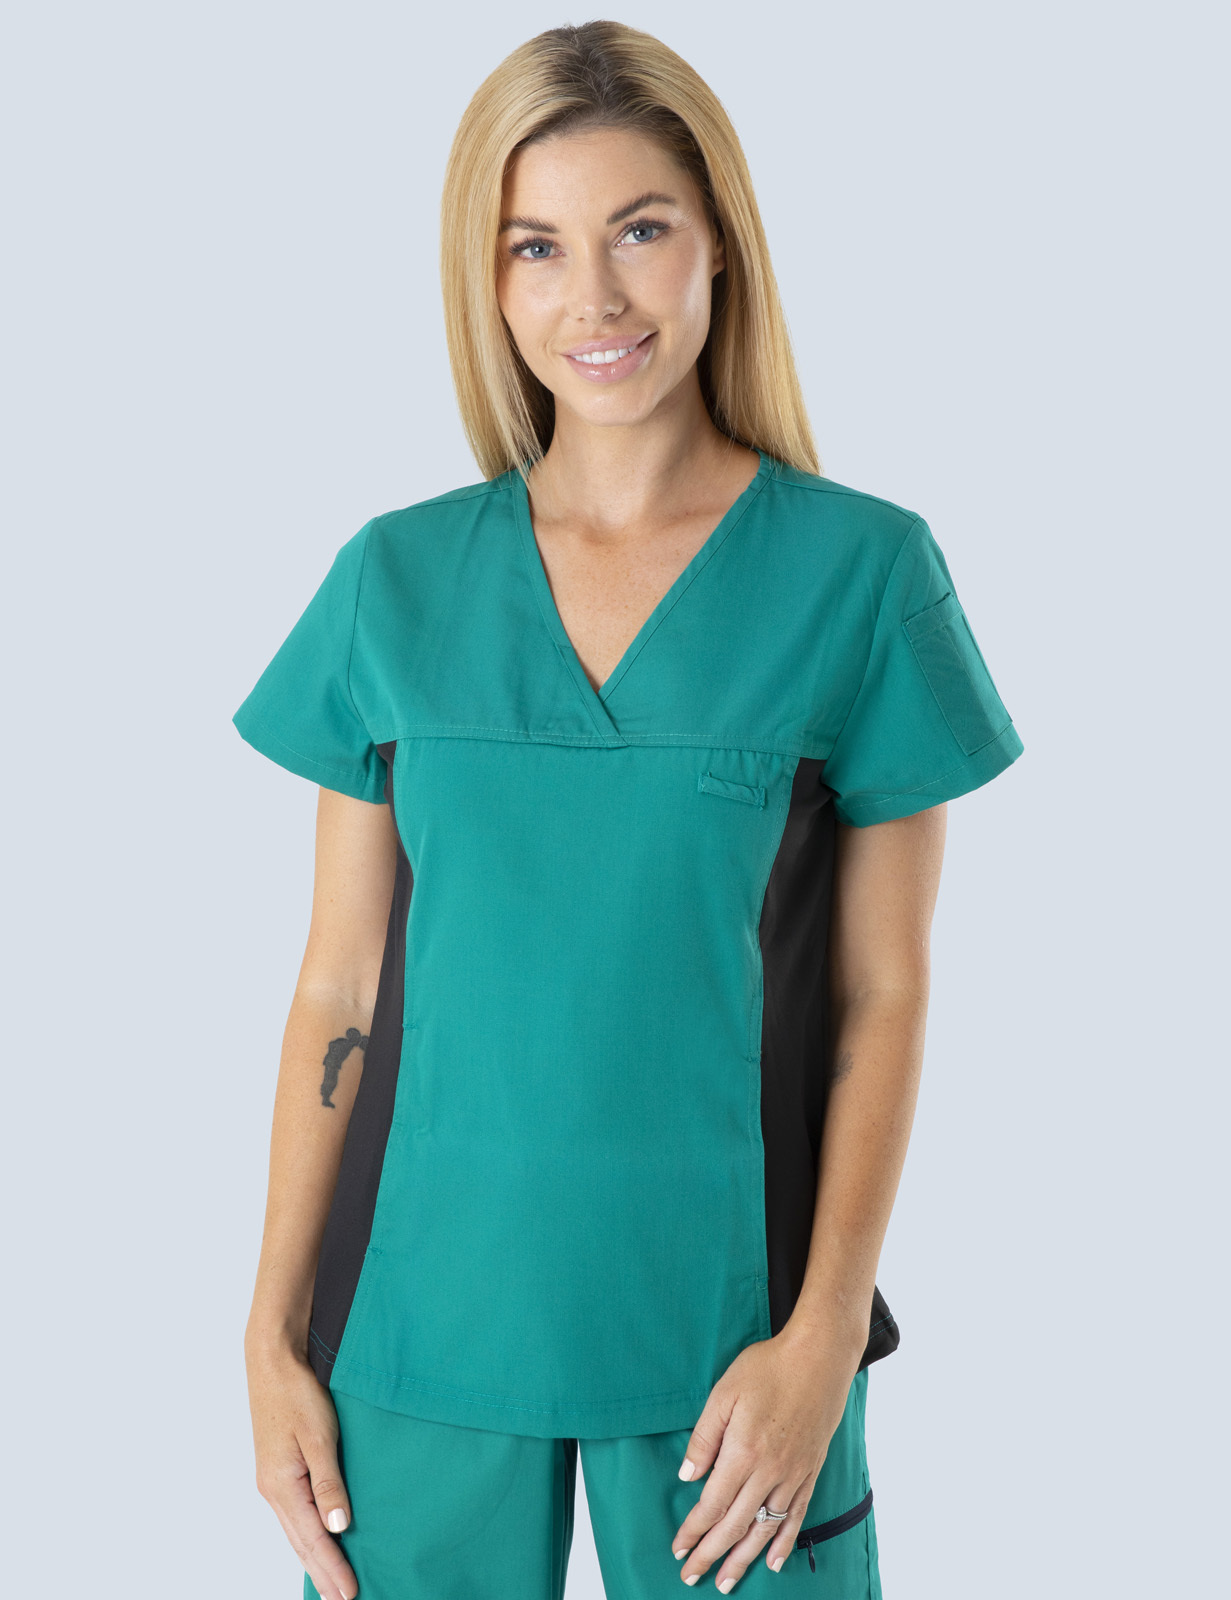 RBWH - EdtcCN (Women's Fit Solid Scrub Top and Cargo Pants in Hunter incl Logos)